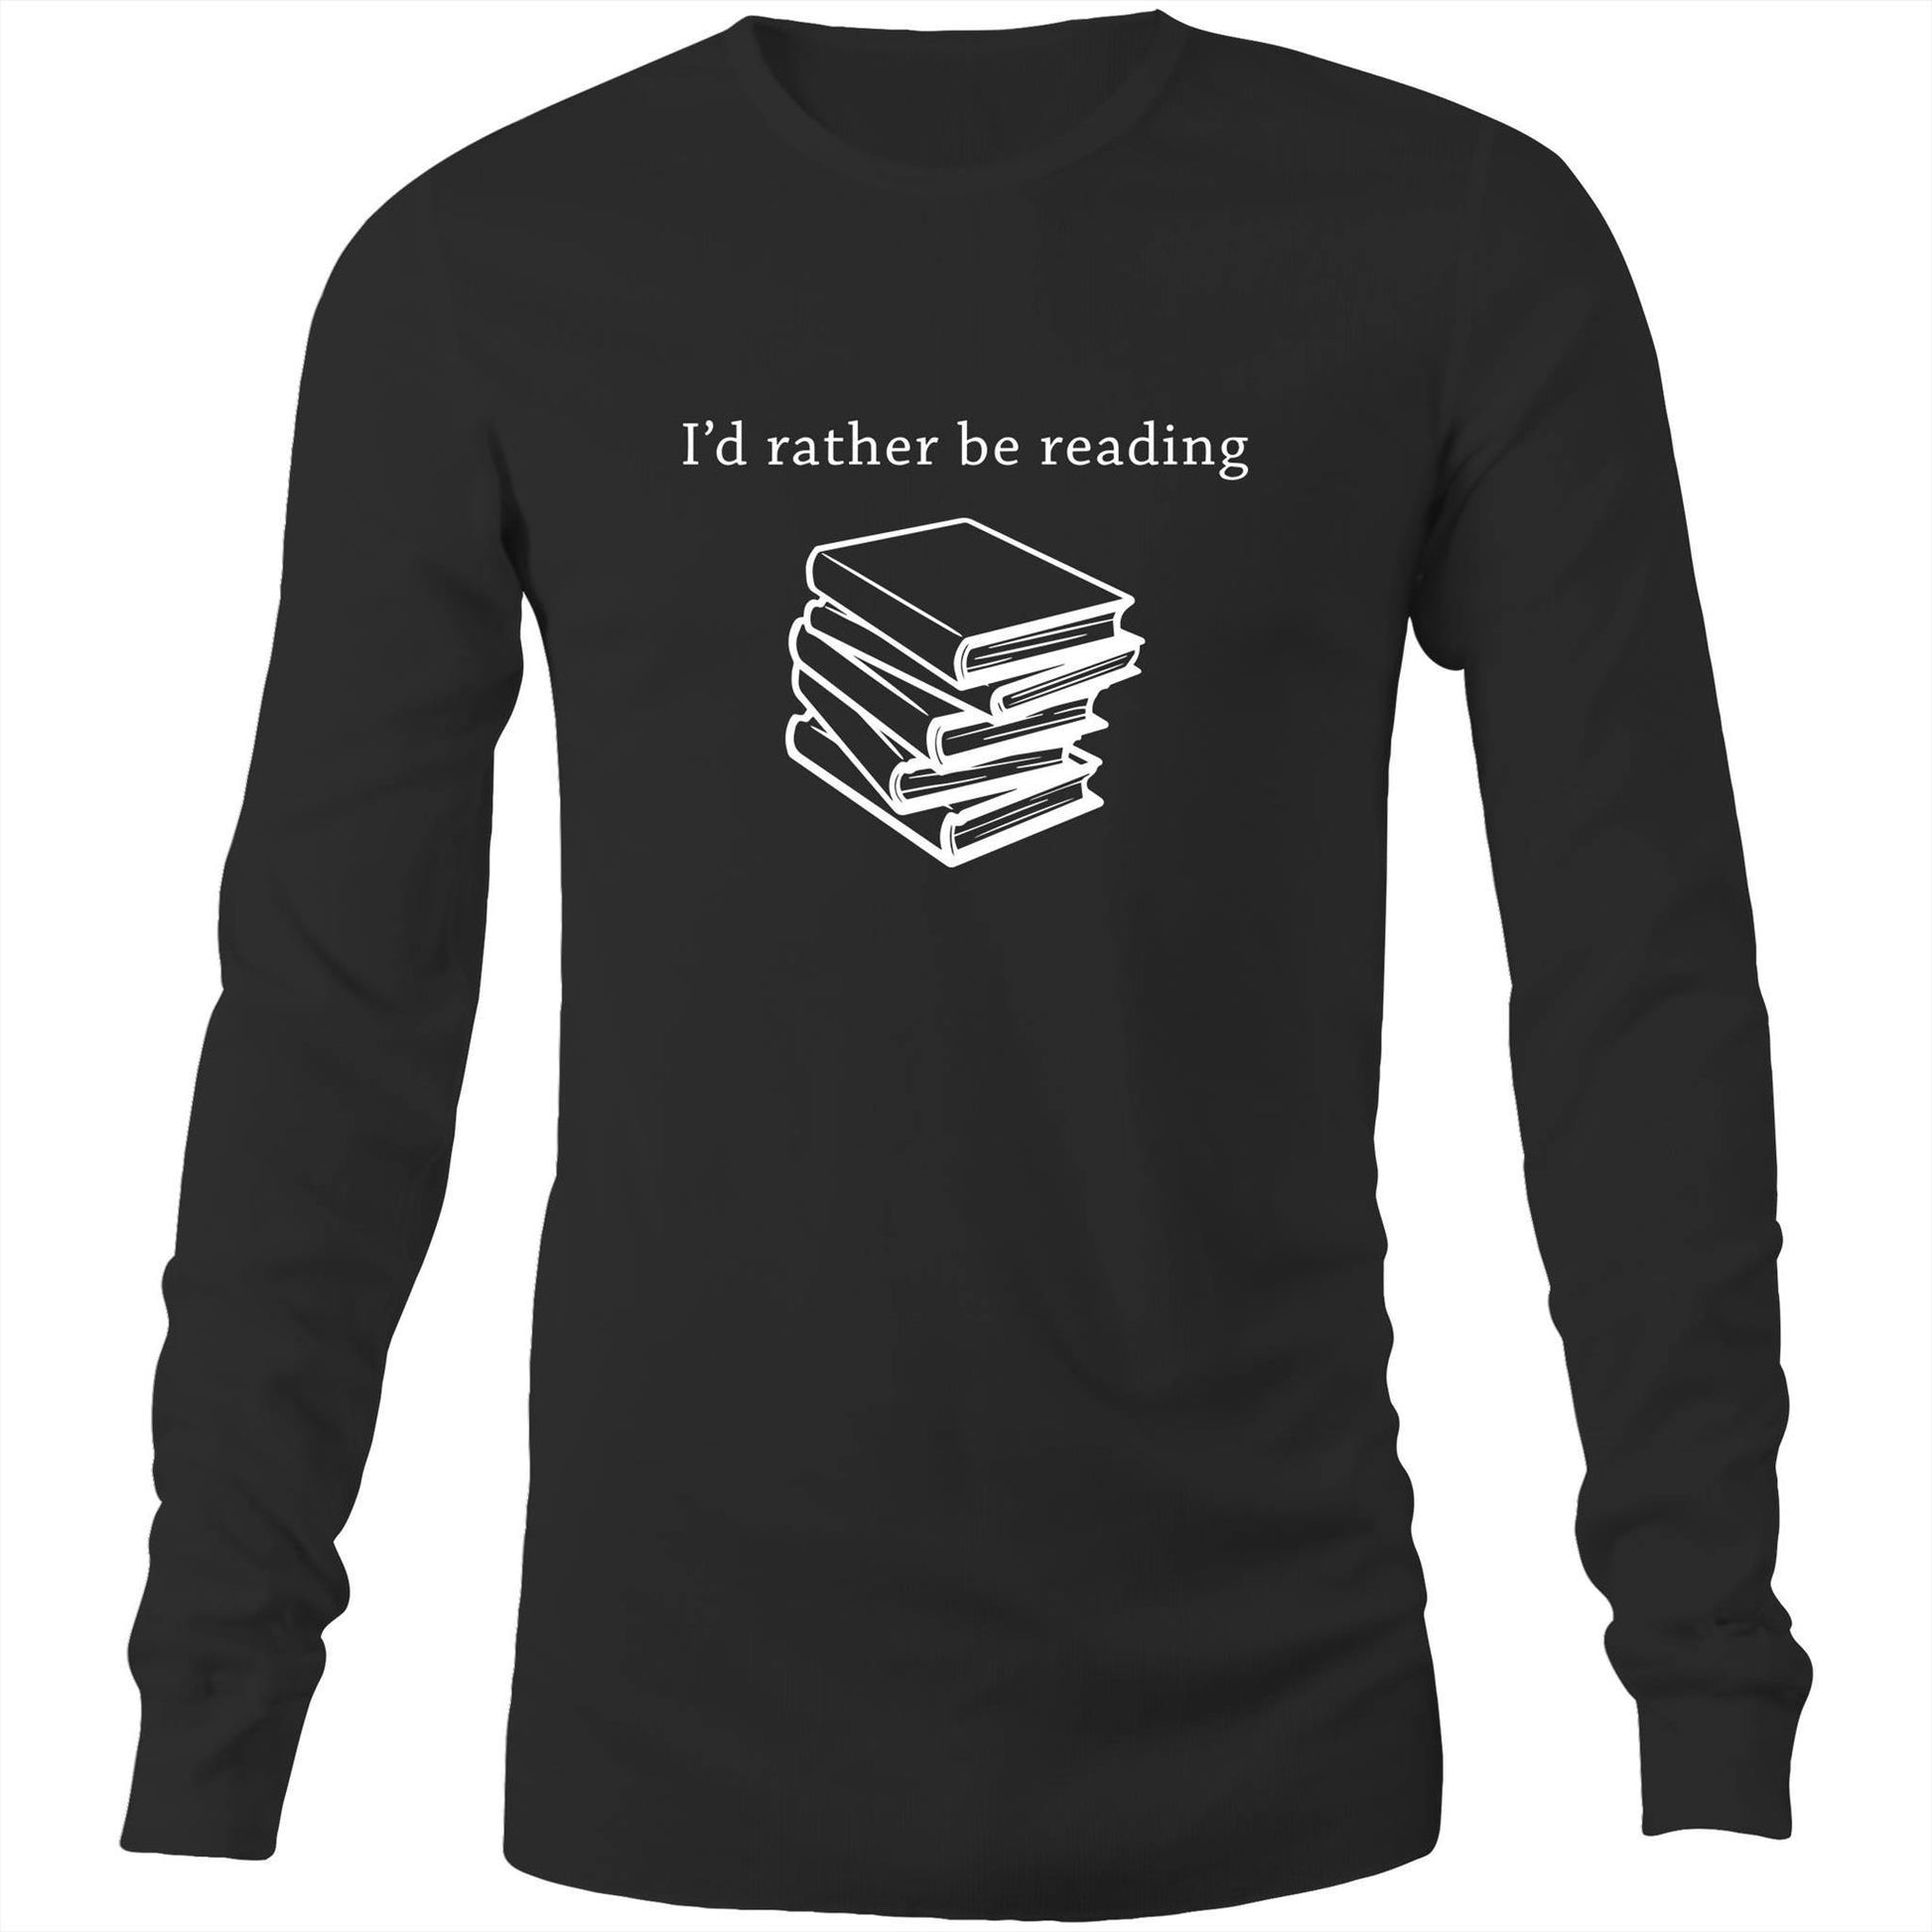 I'd Rather Be Reading - Long Sleeve T-Shirt Black Unisex Long Sleeve T-shirt Mens Womens